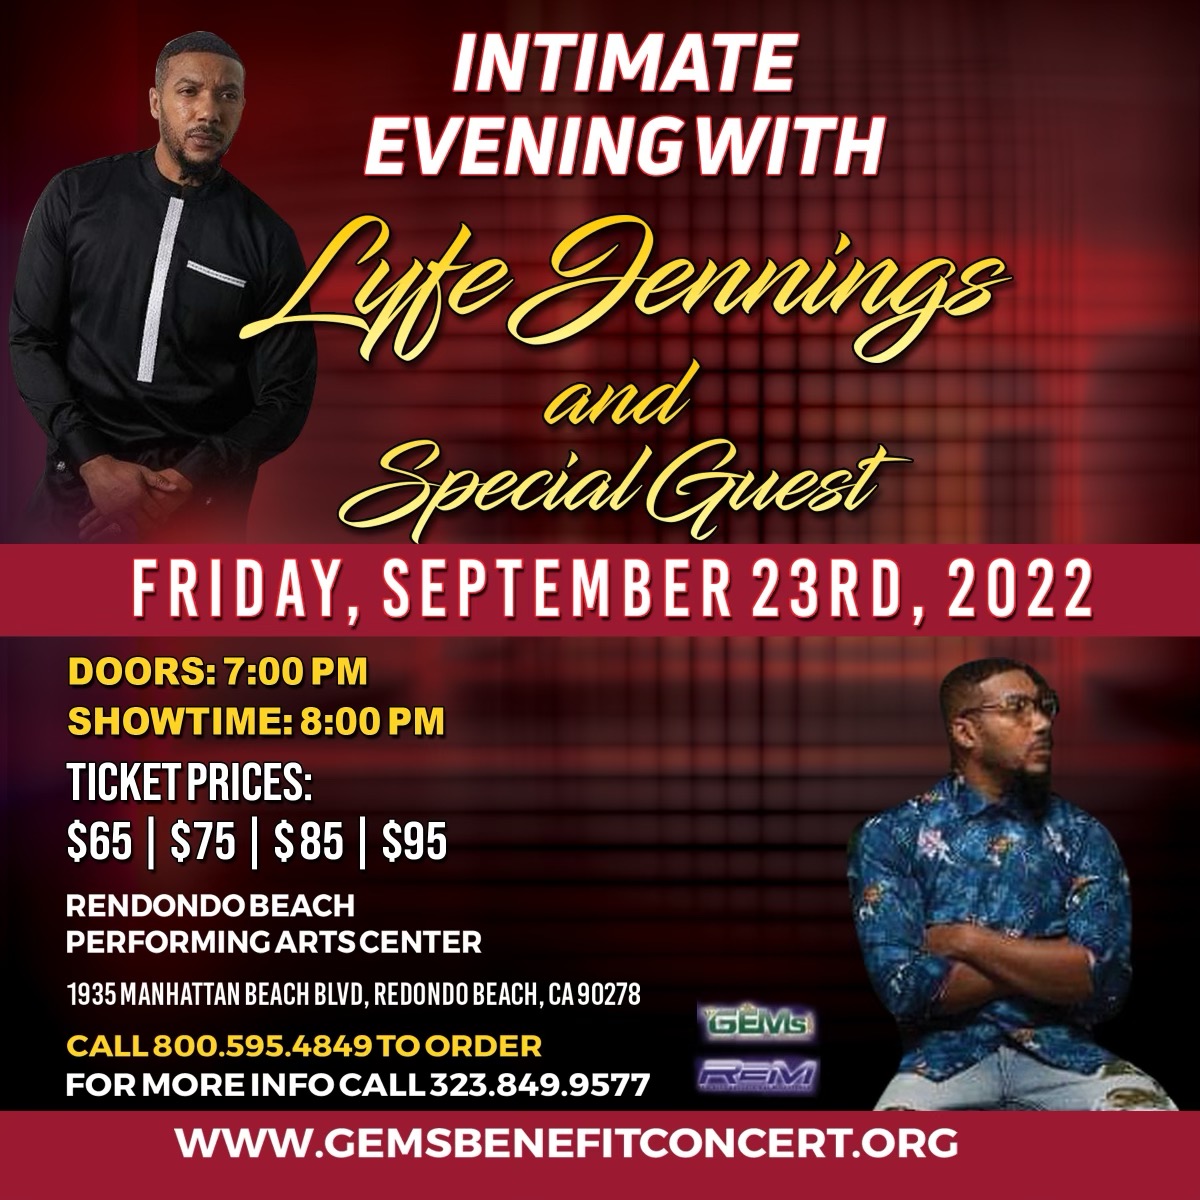 Lyfe Jennings & Special Guests